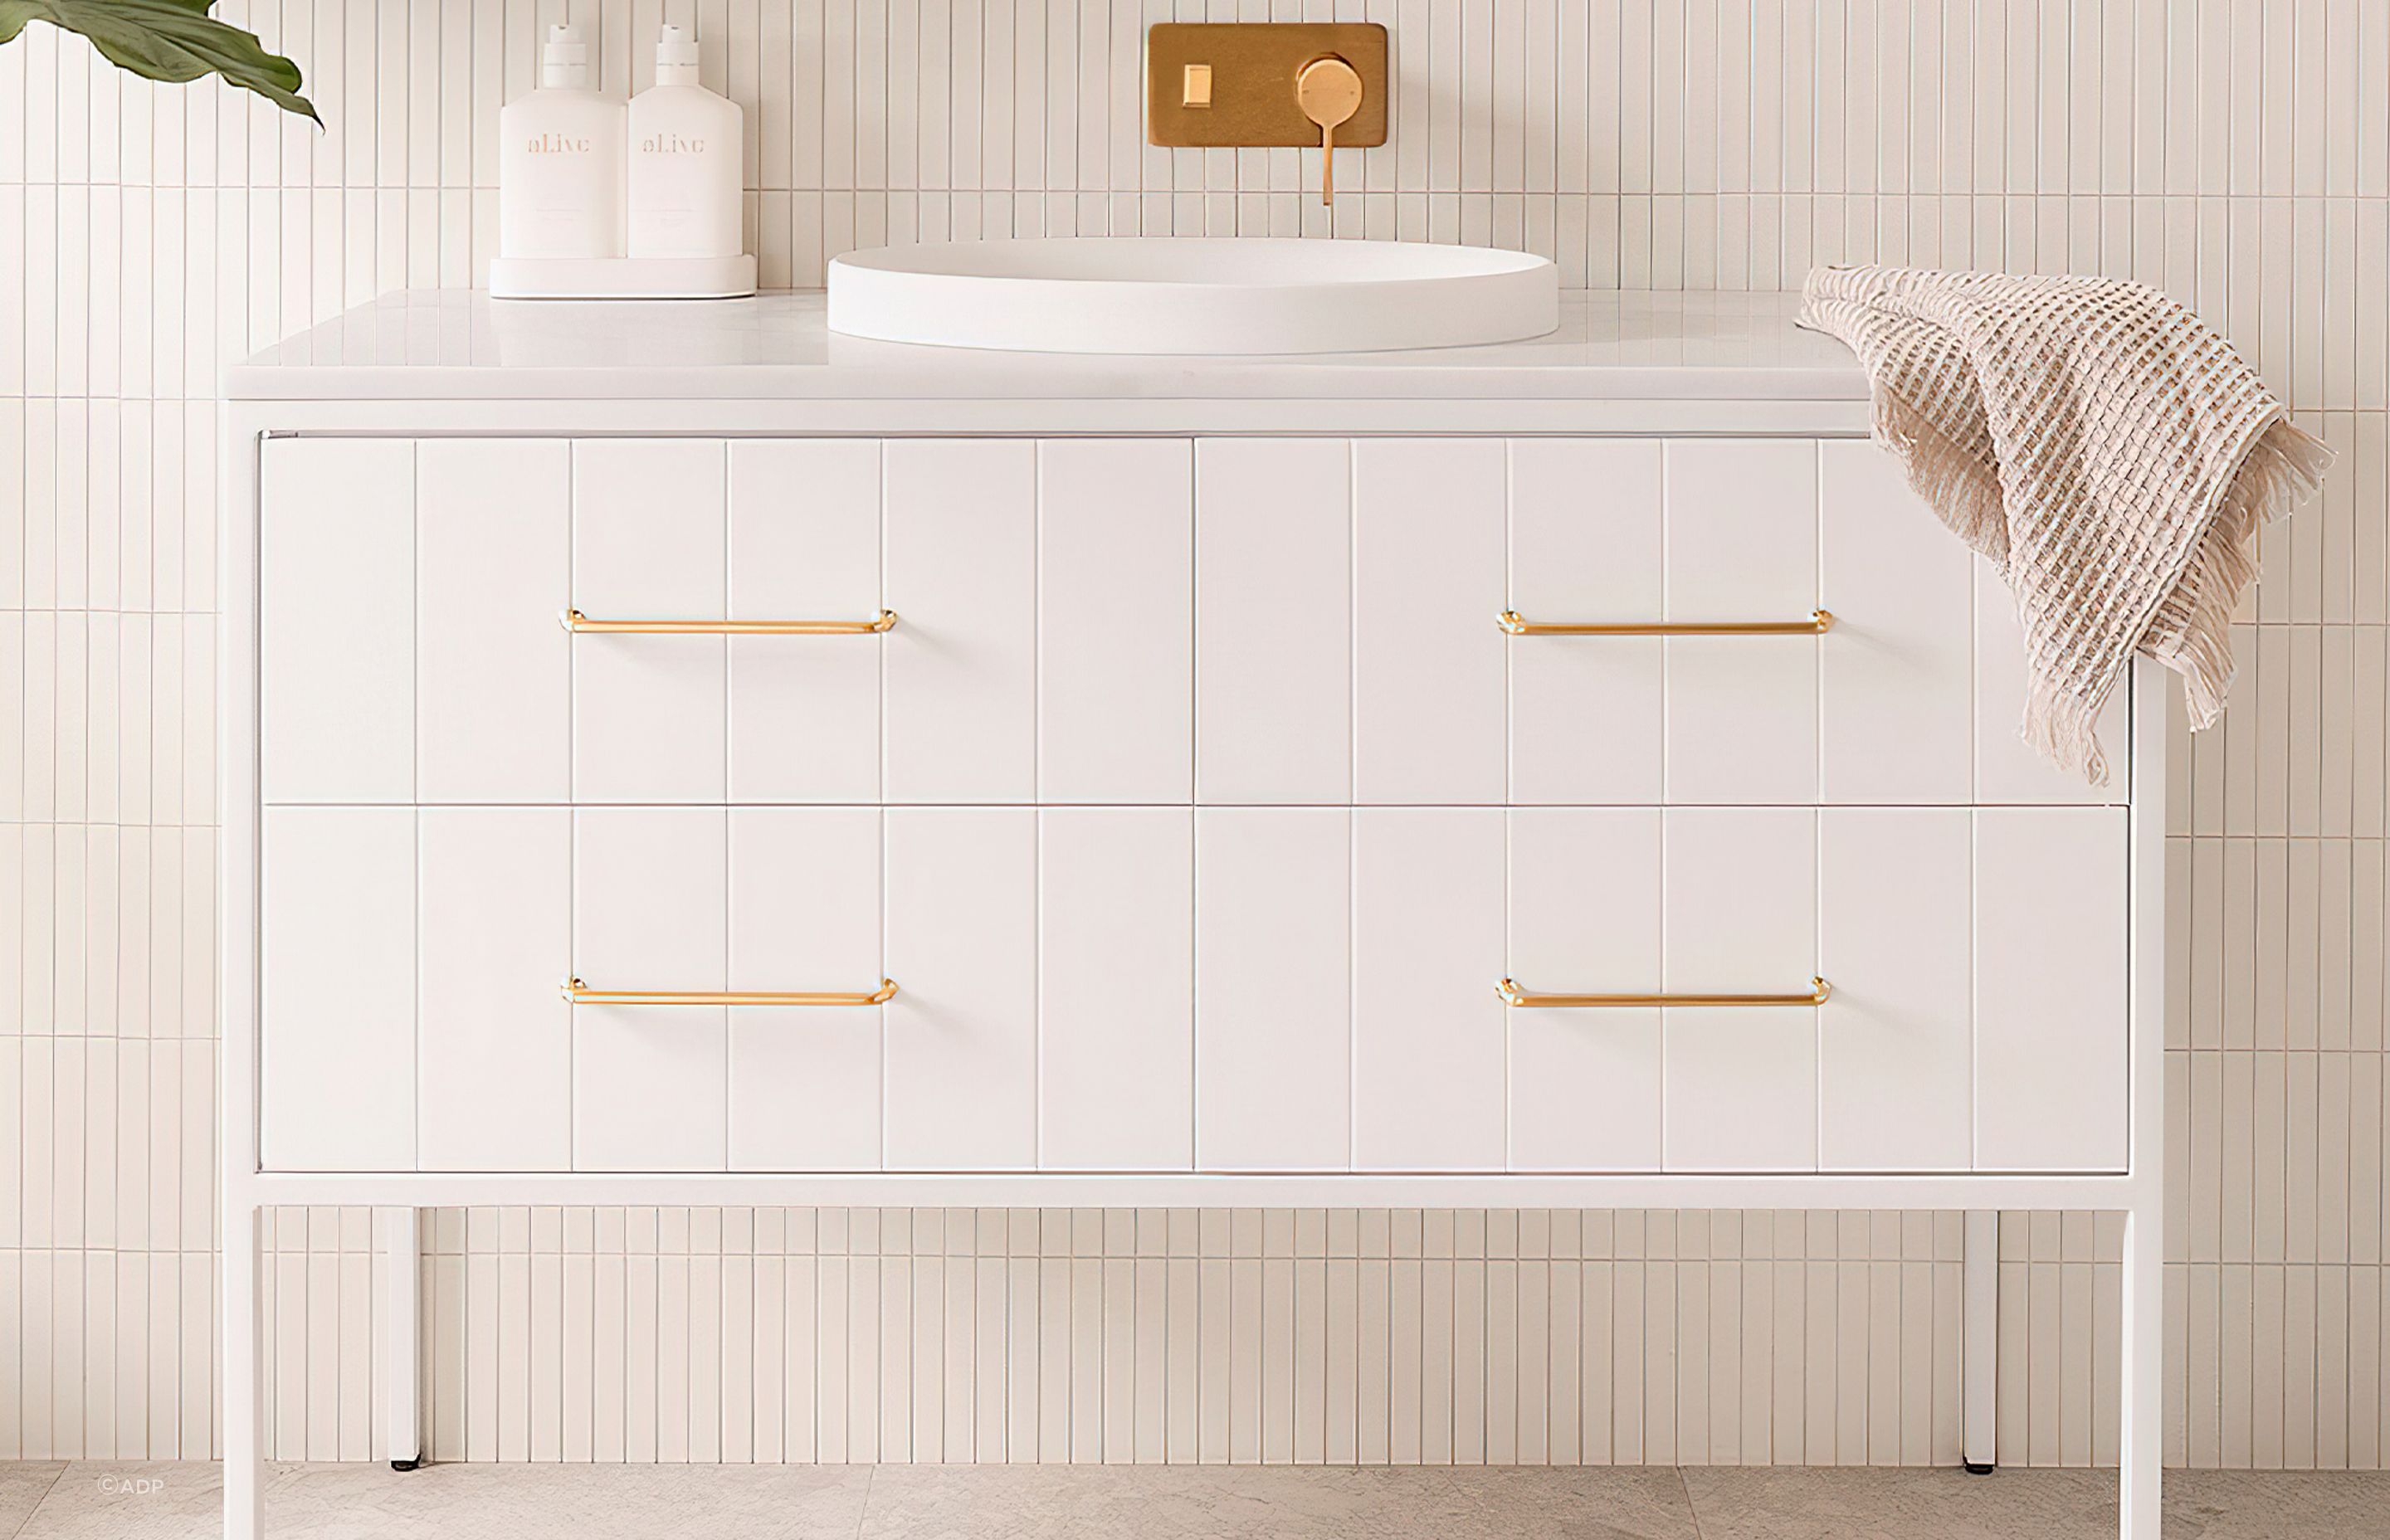 Four nicely finished drawers offering ample storage space